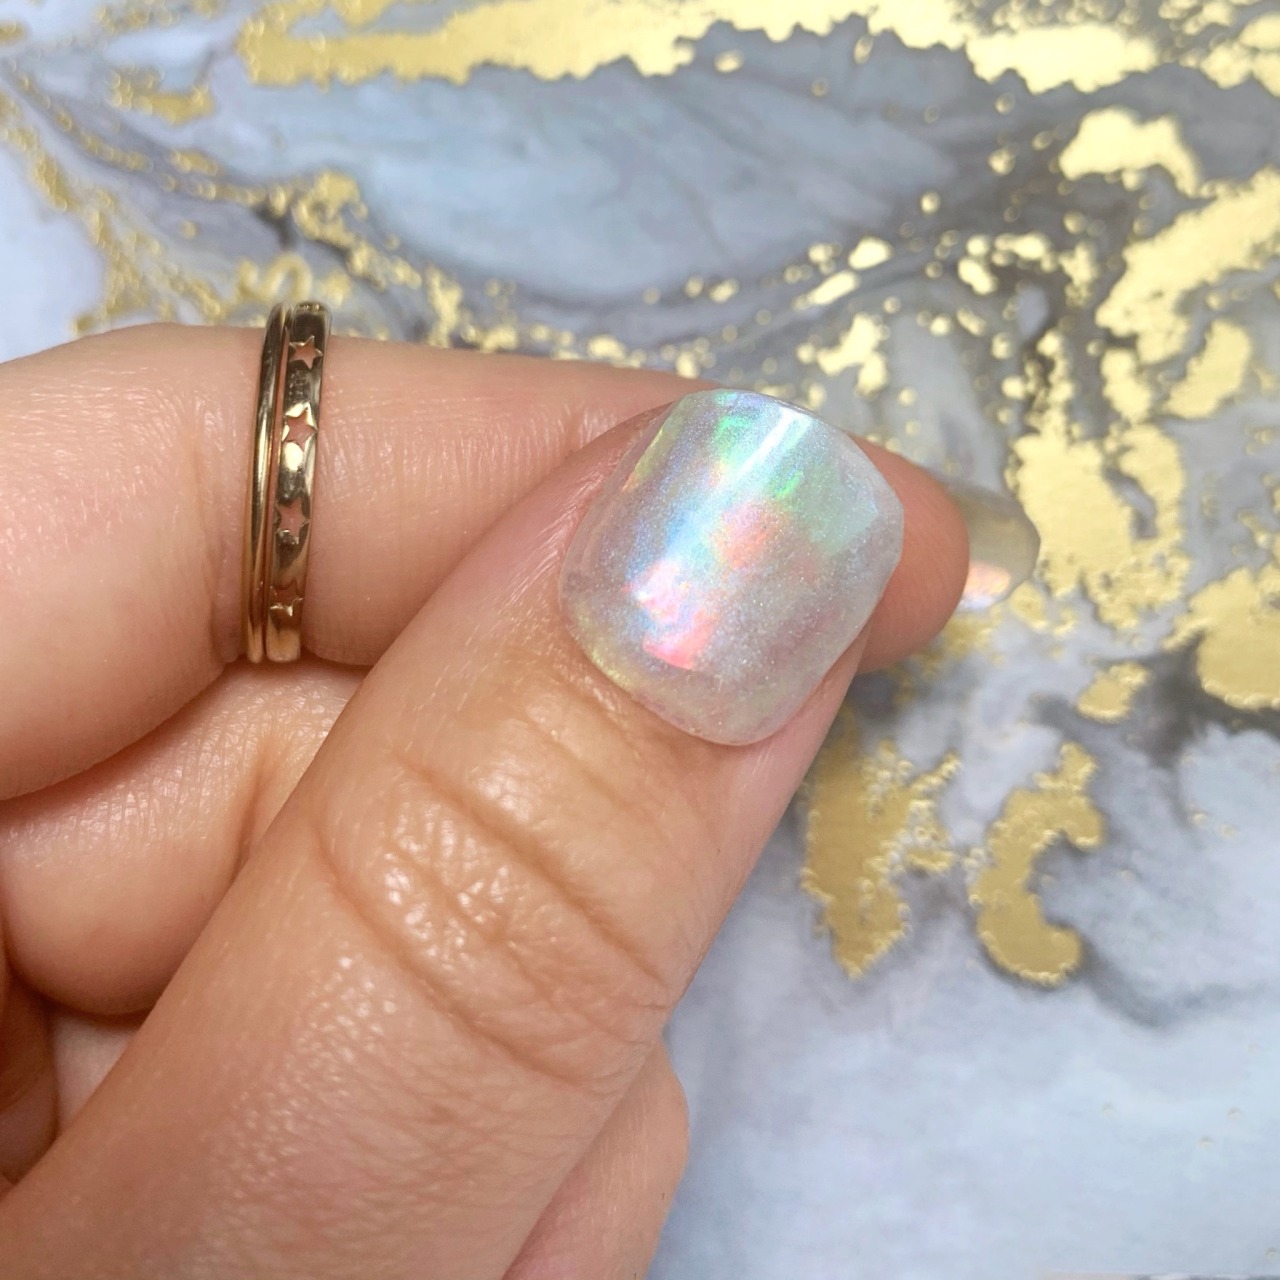 The art of Nails - Nail artist - Acrylics with encapsulated dots, marbled  acrylic with angel paper & fairy magic pigment :) | Facebook